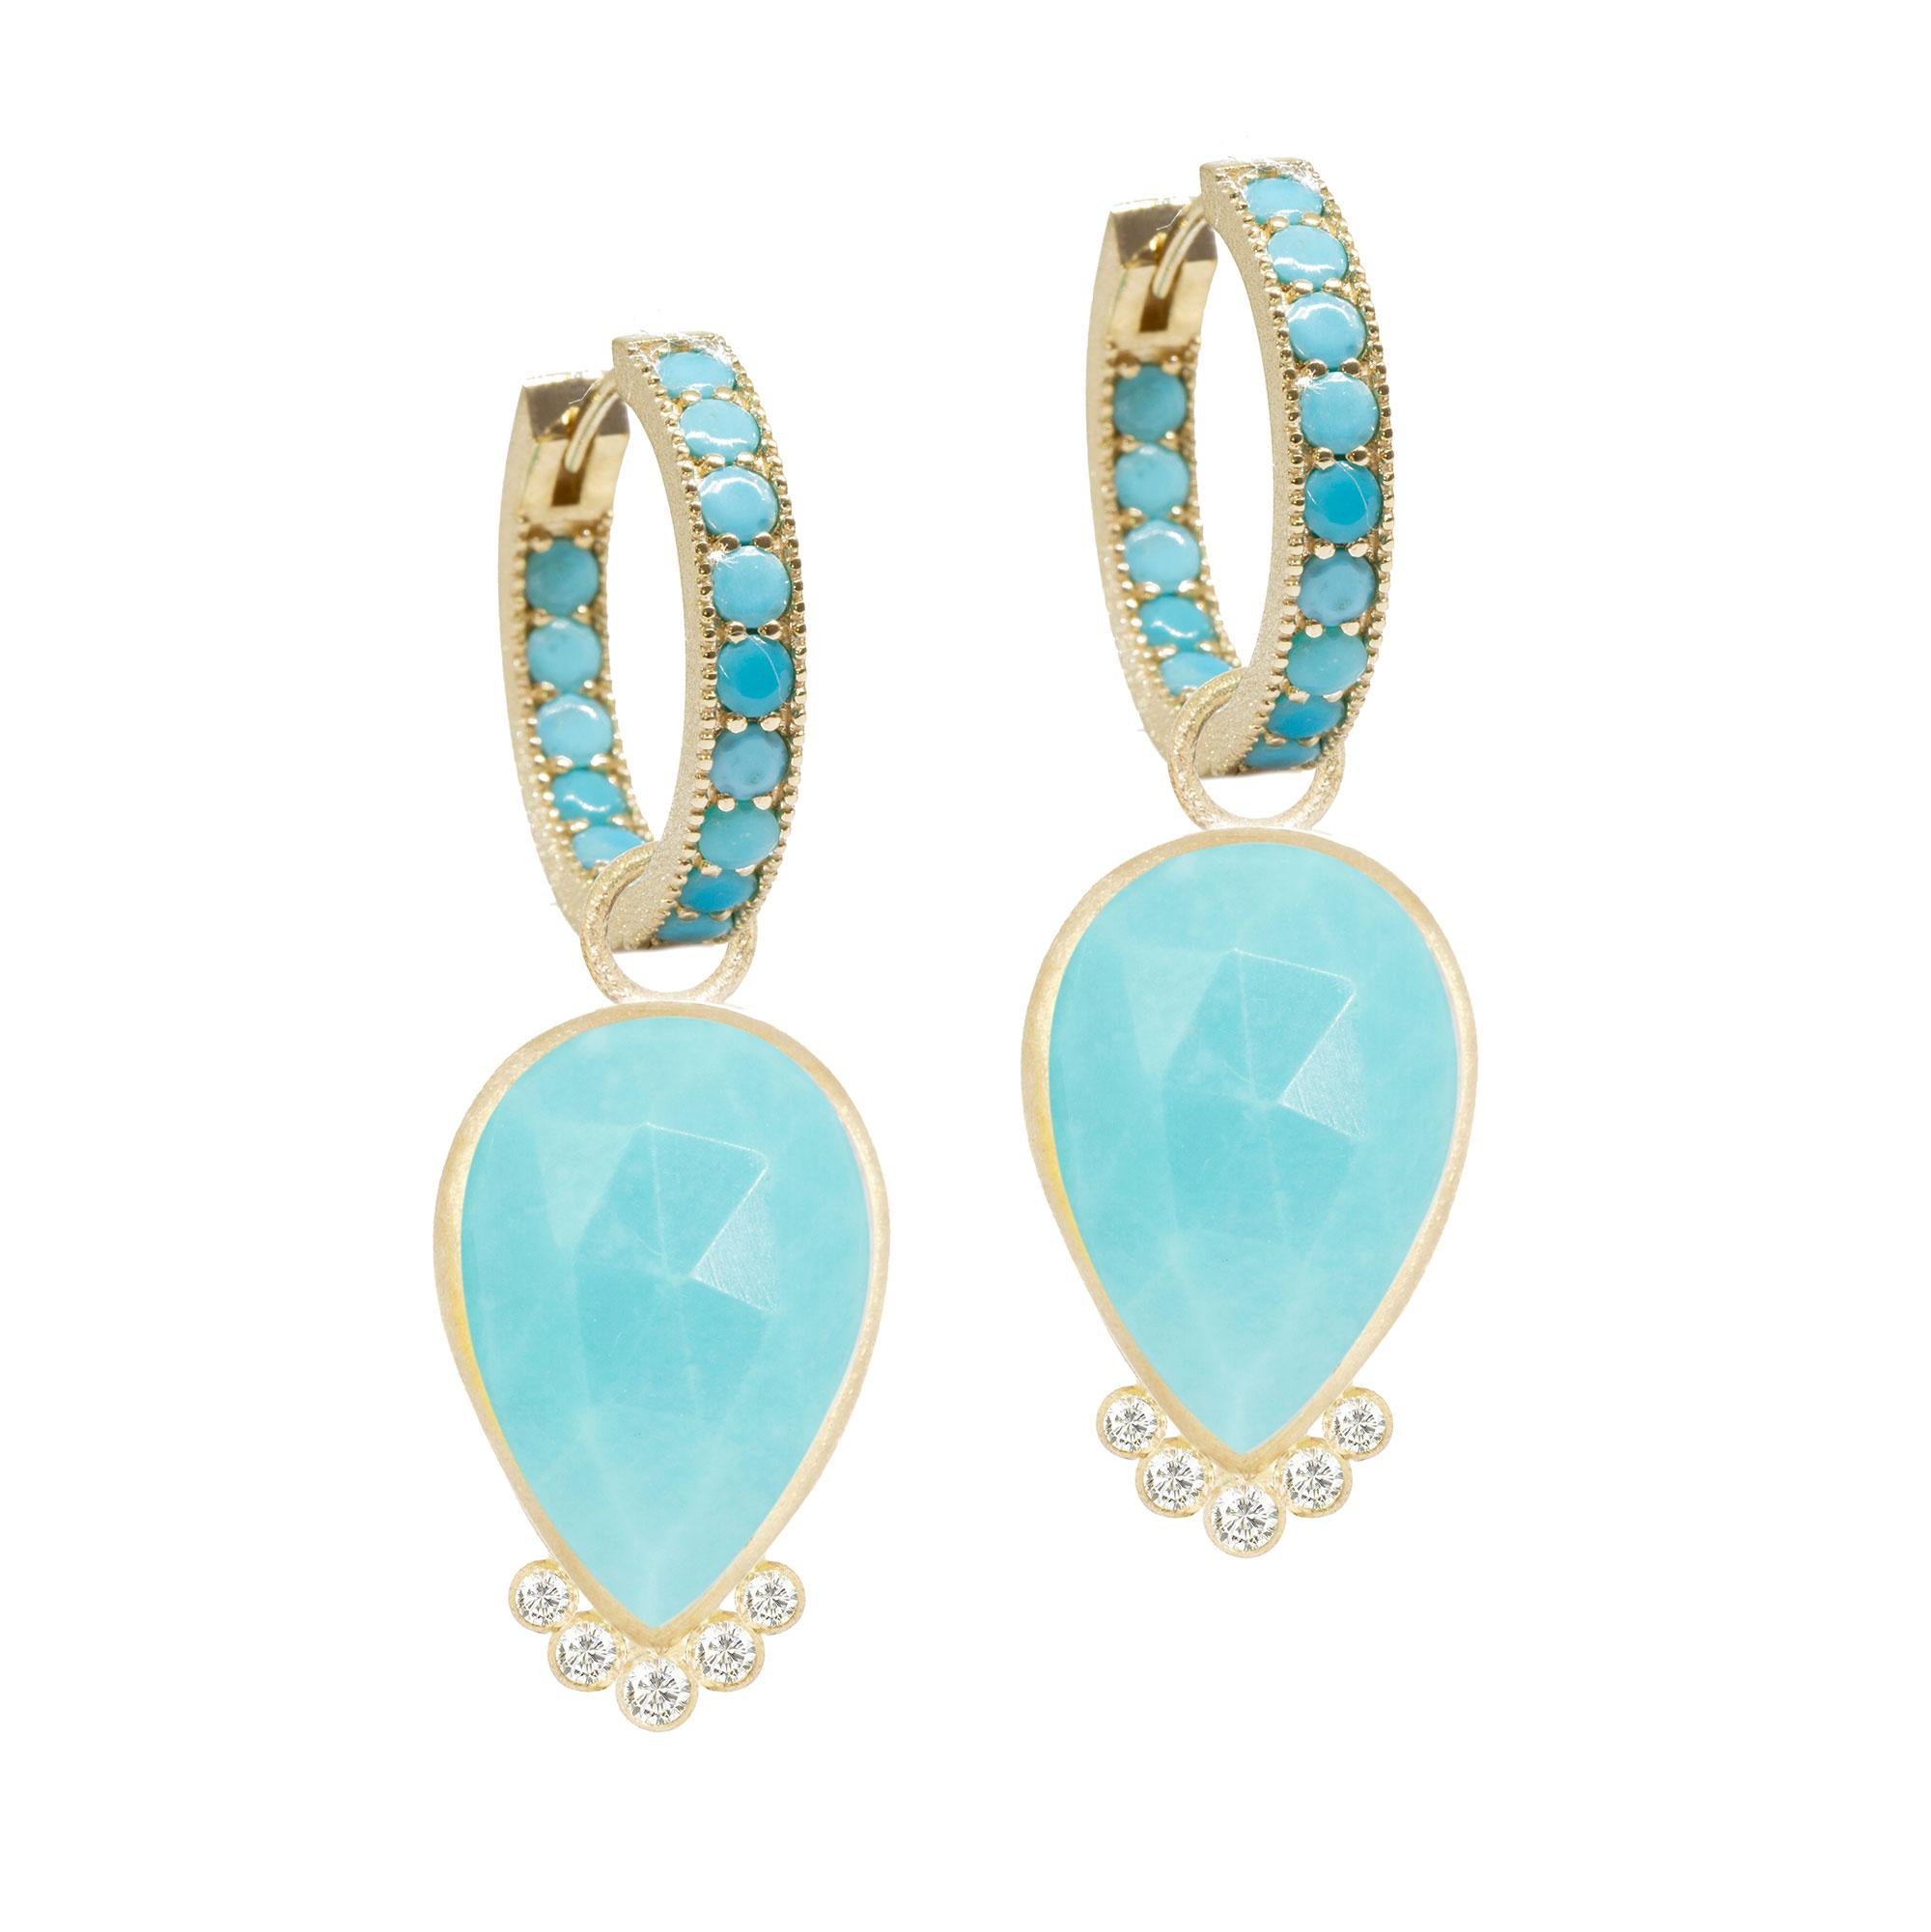 With vibrant turquoise in a petal-like pear shape, the diamond-accented Mia Medium Gold Charms bloom with any of our hoops and mix well with other styles.

Nina Nguyen Design's patent-pending earrings have an element on the back of the stud or charm